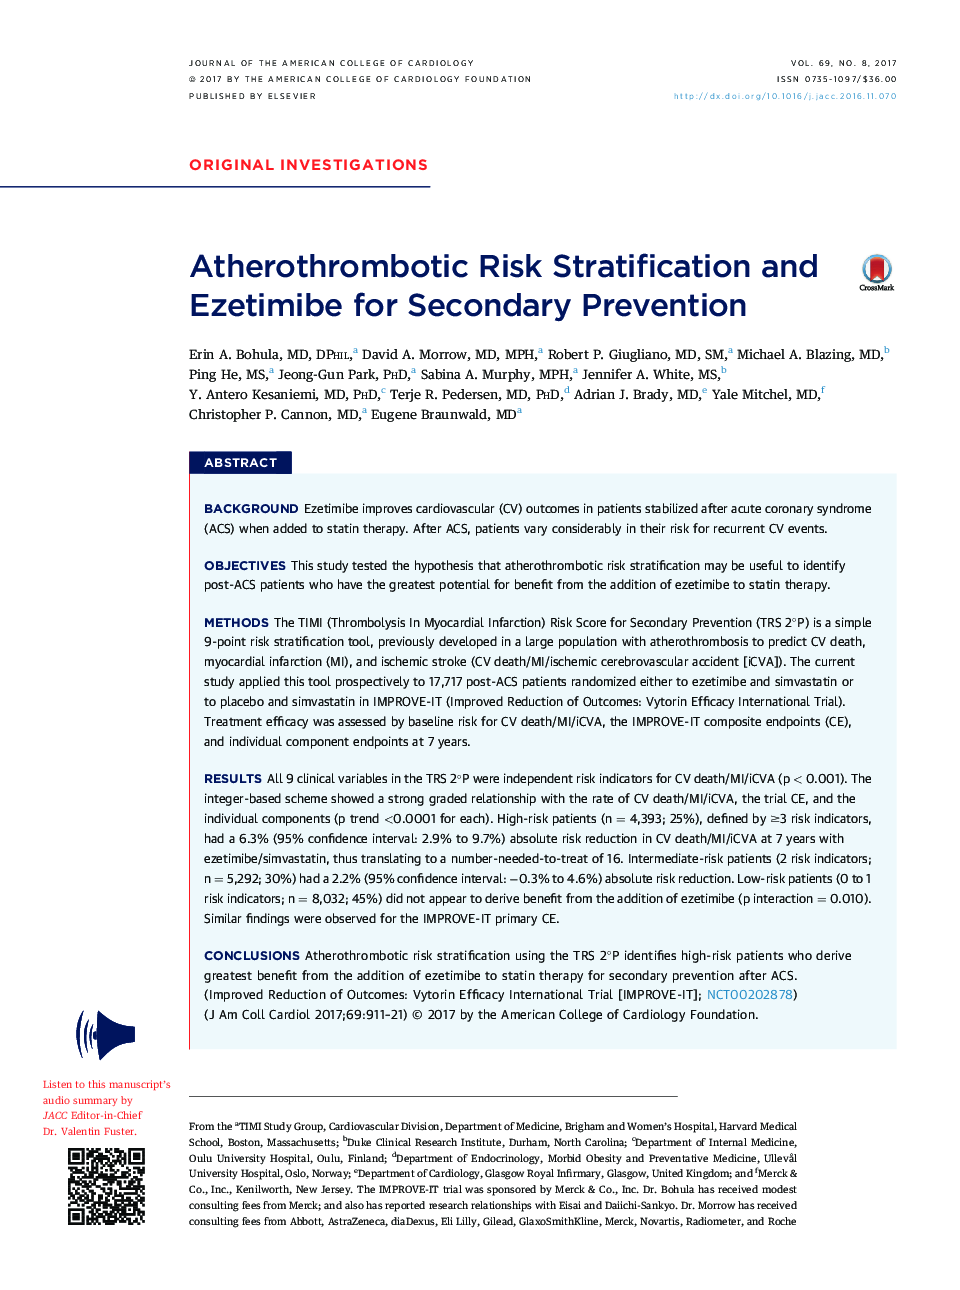 Atherothrombotic Risk Stratification and Ezetimibe for Secondary Prevention